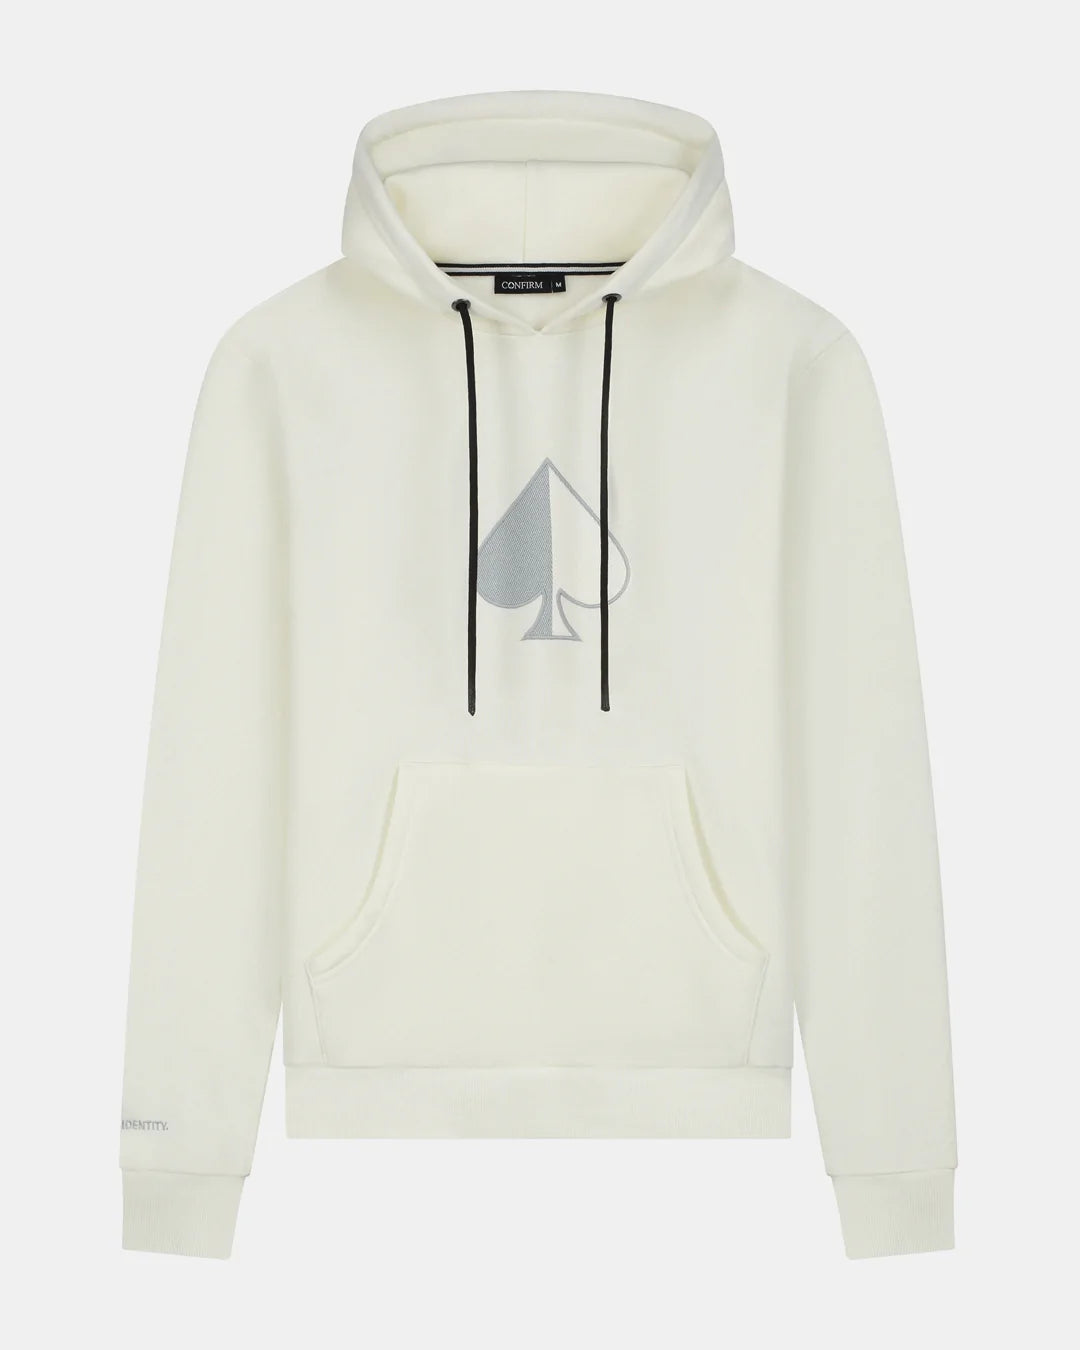 Confirm Spade Hoodie Marshmallow